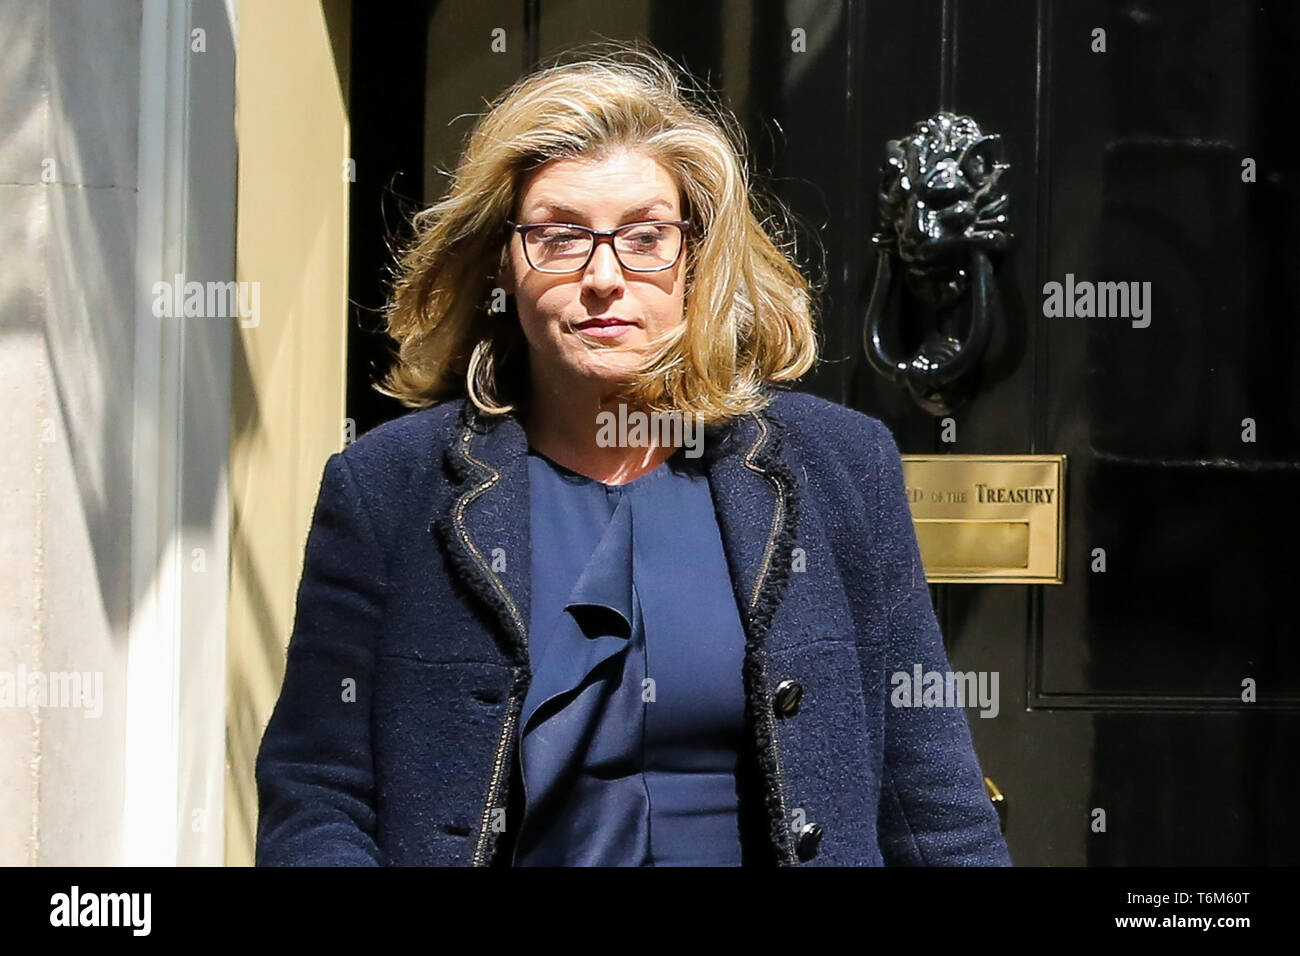 Penny Mordaunt has been appointed as Secretary of State for Defence after the British Prime Minister Theresa May sacked Gavin Williamson over Huawei leak following an inquiry into the leak of information from the National Security Council.  Penny Mordaunt becomes the first Defence Secretary. Stock Photo